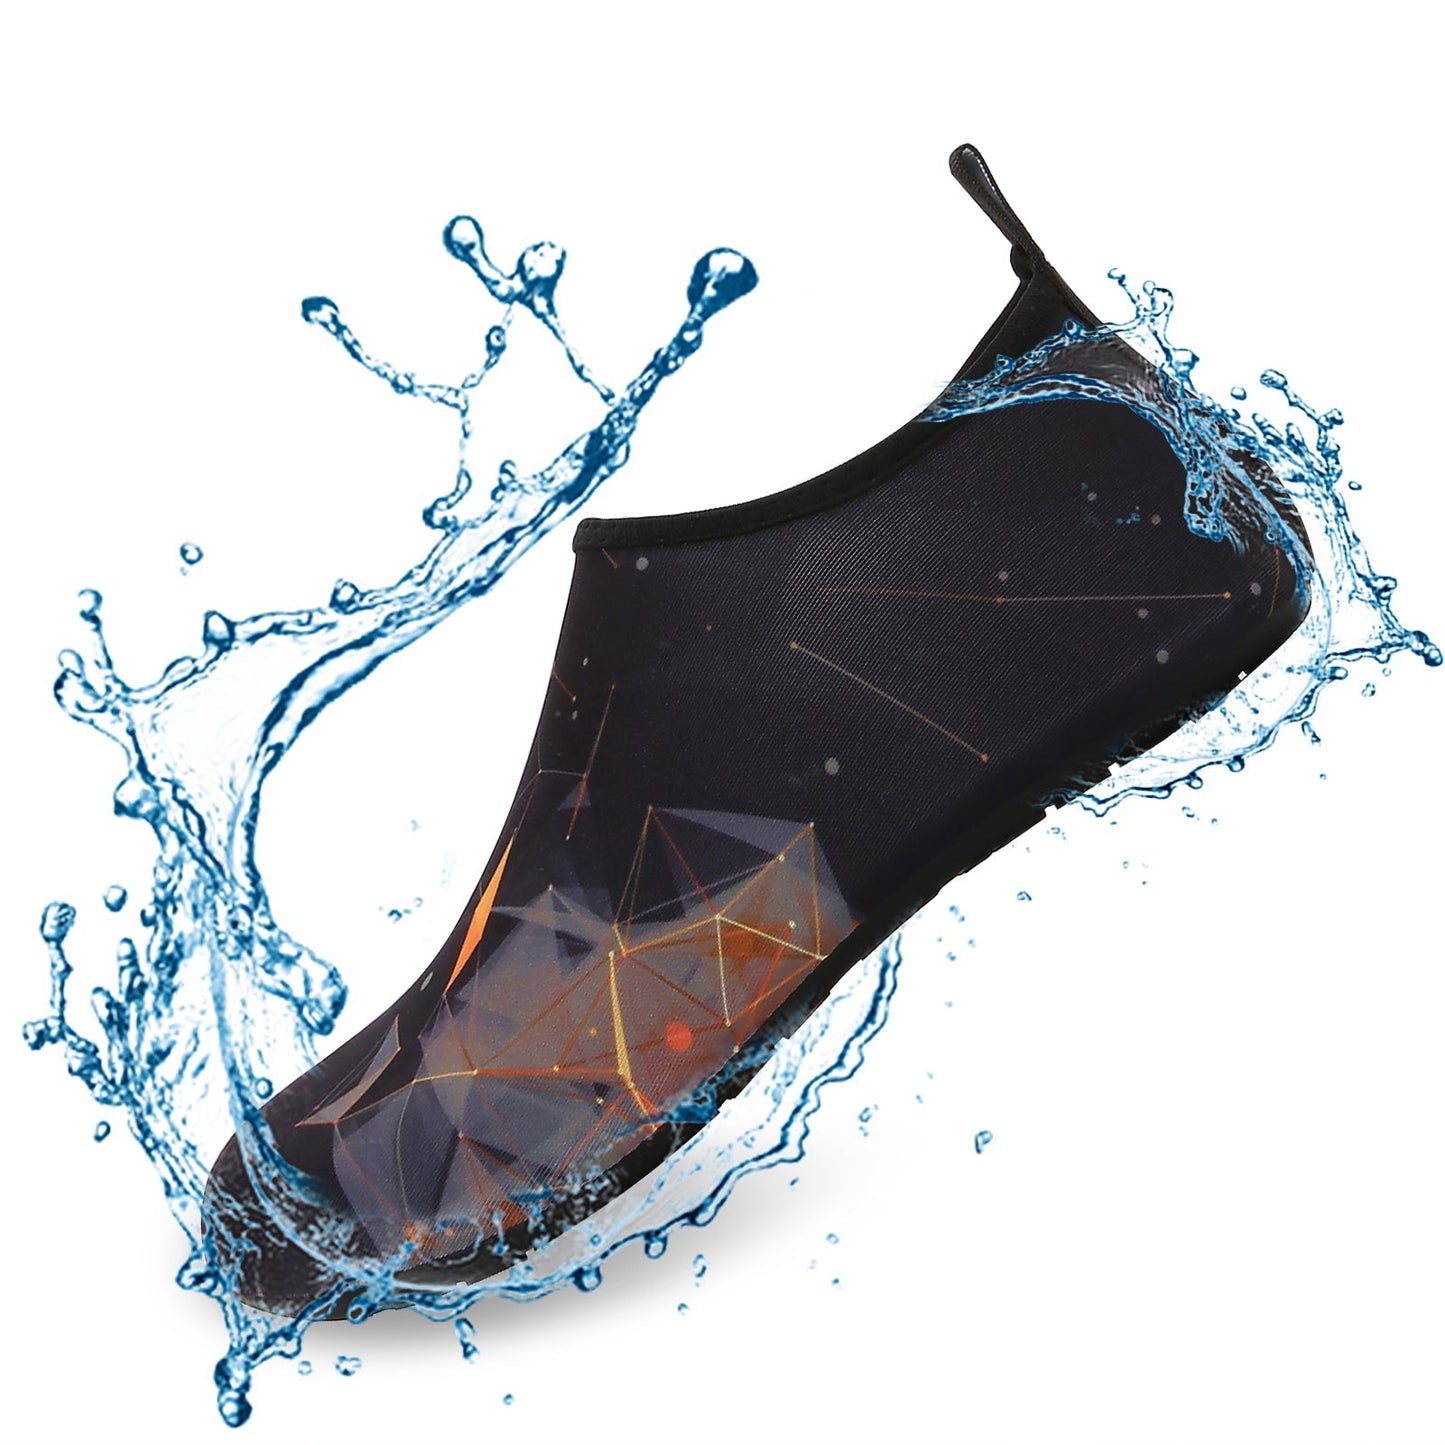 Men and Women a Slip On Barefoot Quick-Dry Beach Aqua Yoga Water Shoes (Prism/Black)